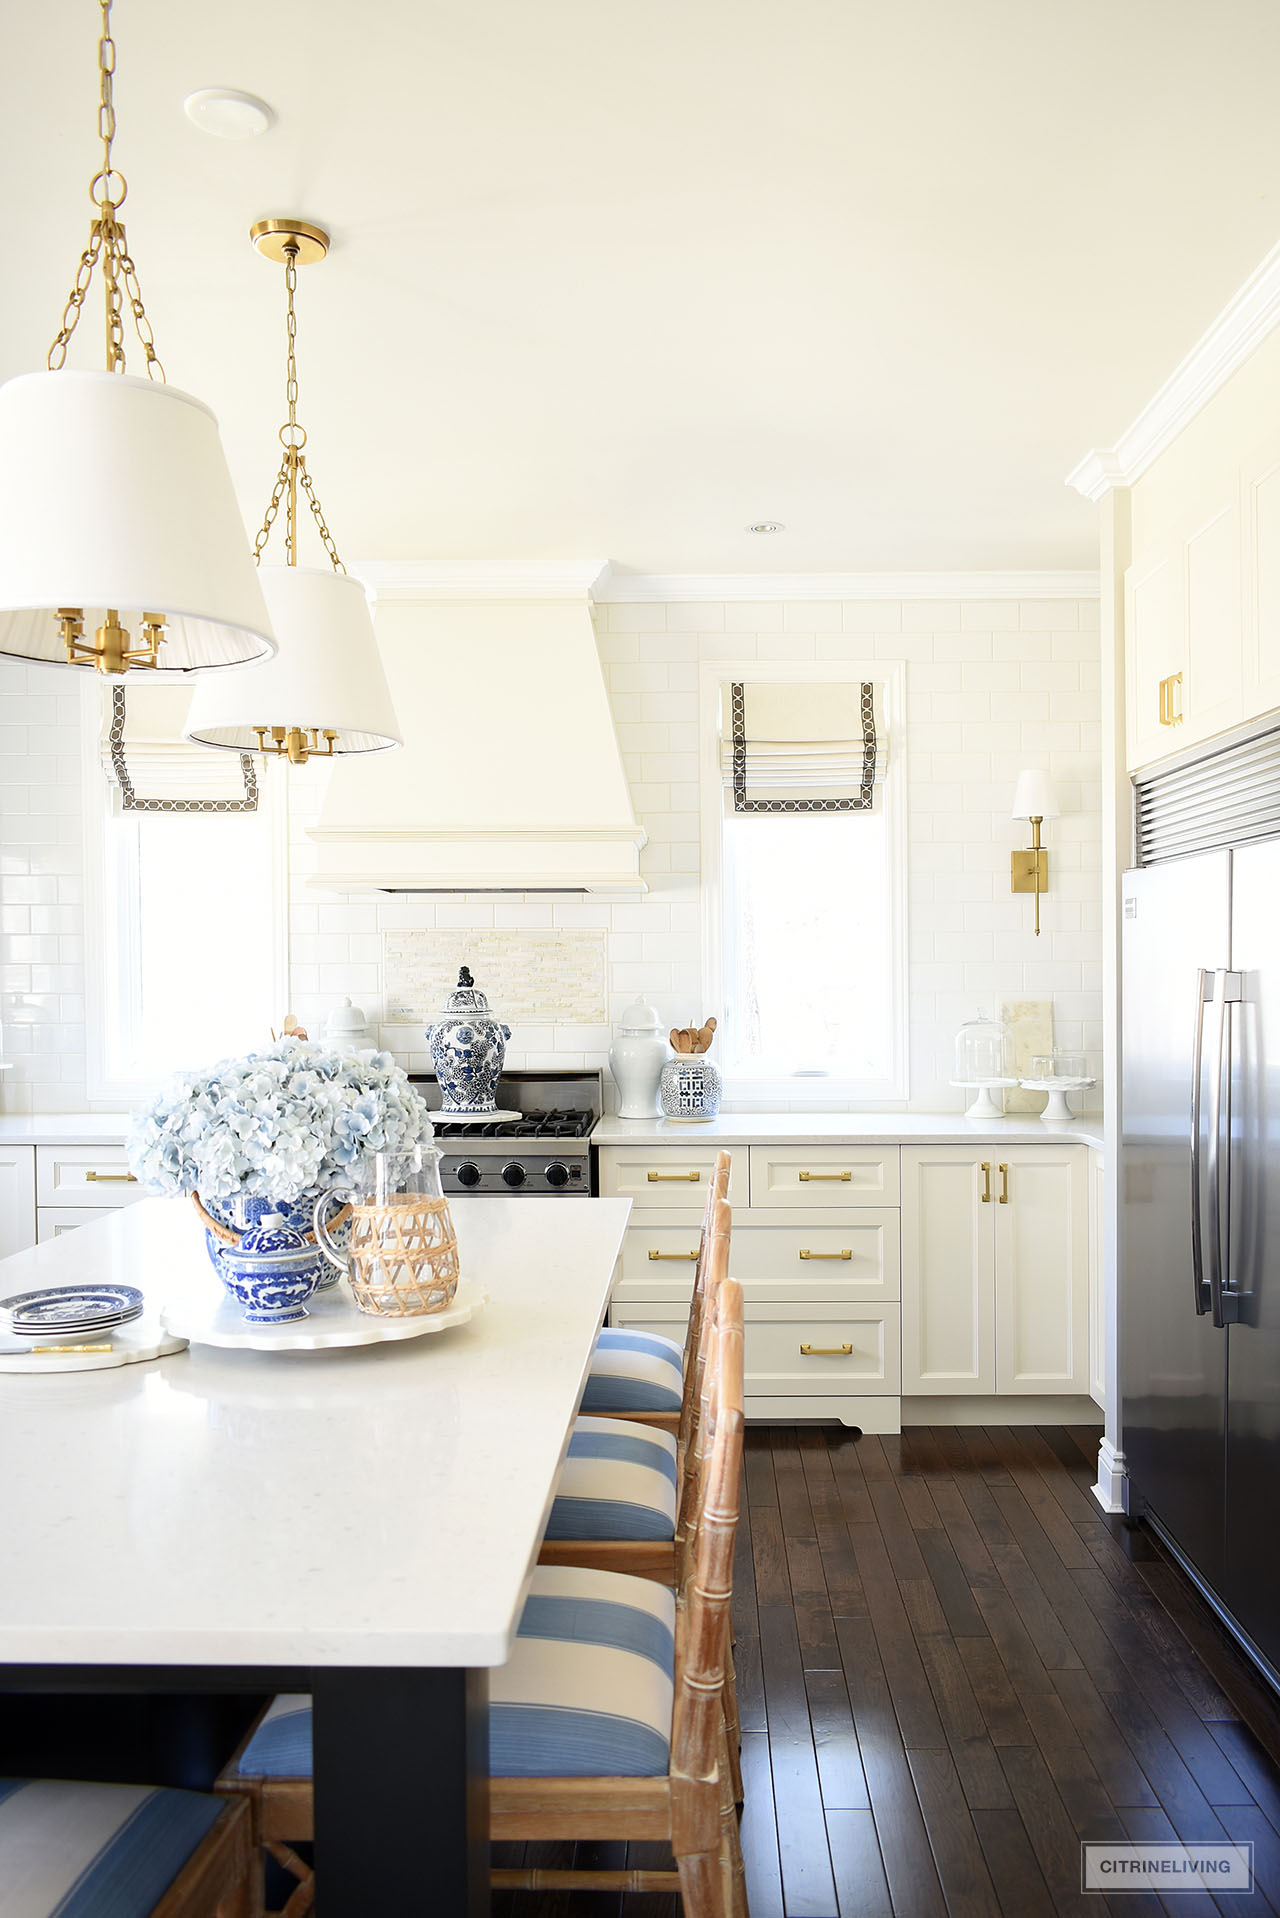 White kitchen decorated for spring with blue and white accents.